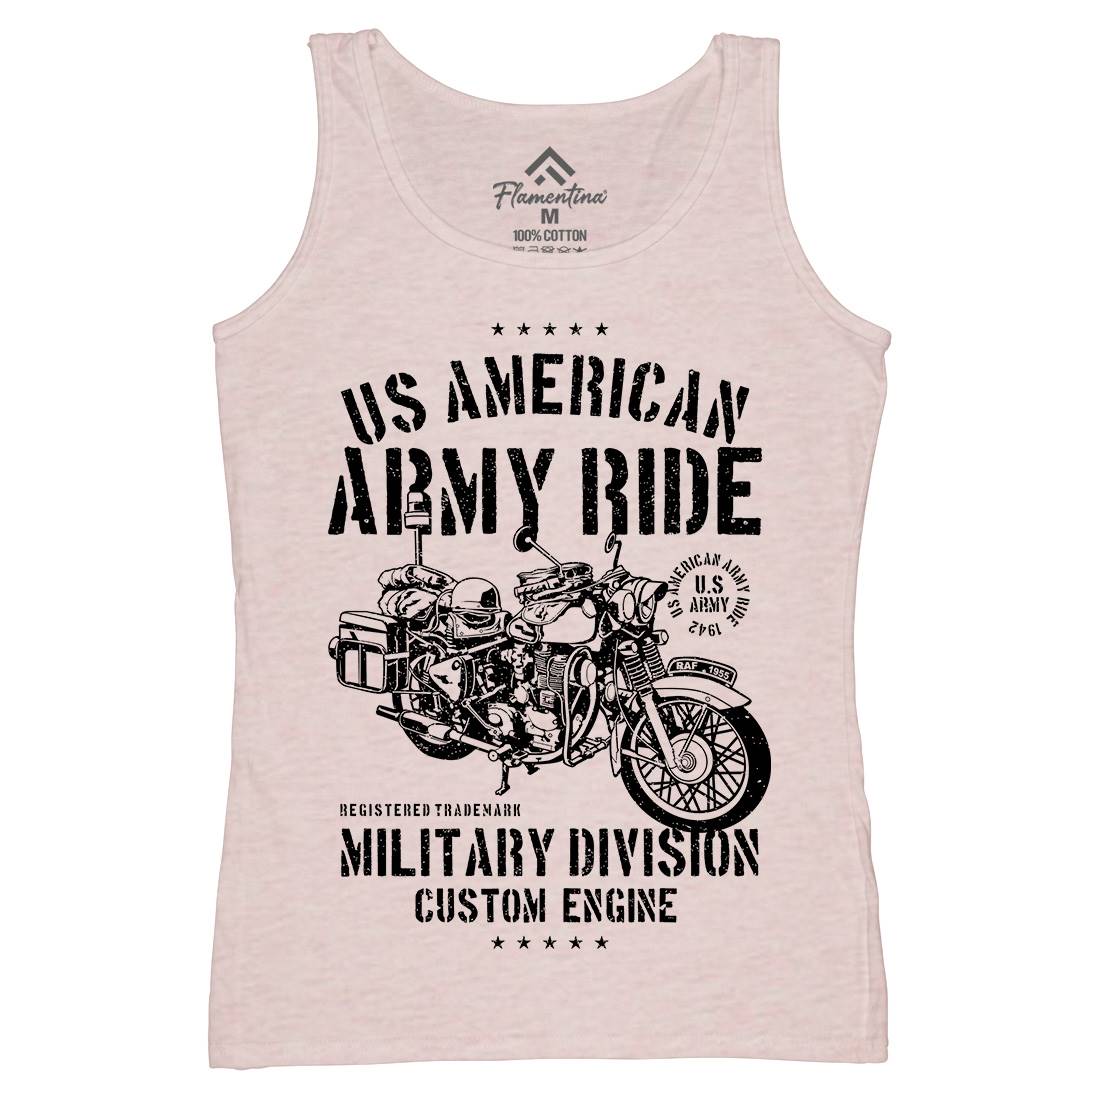 Ride Womens Organic Tank Top Vest Army A613